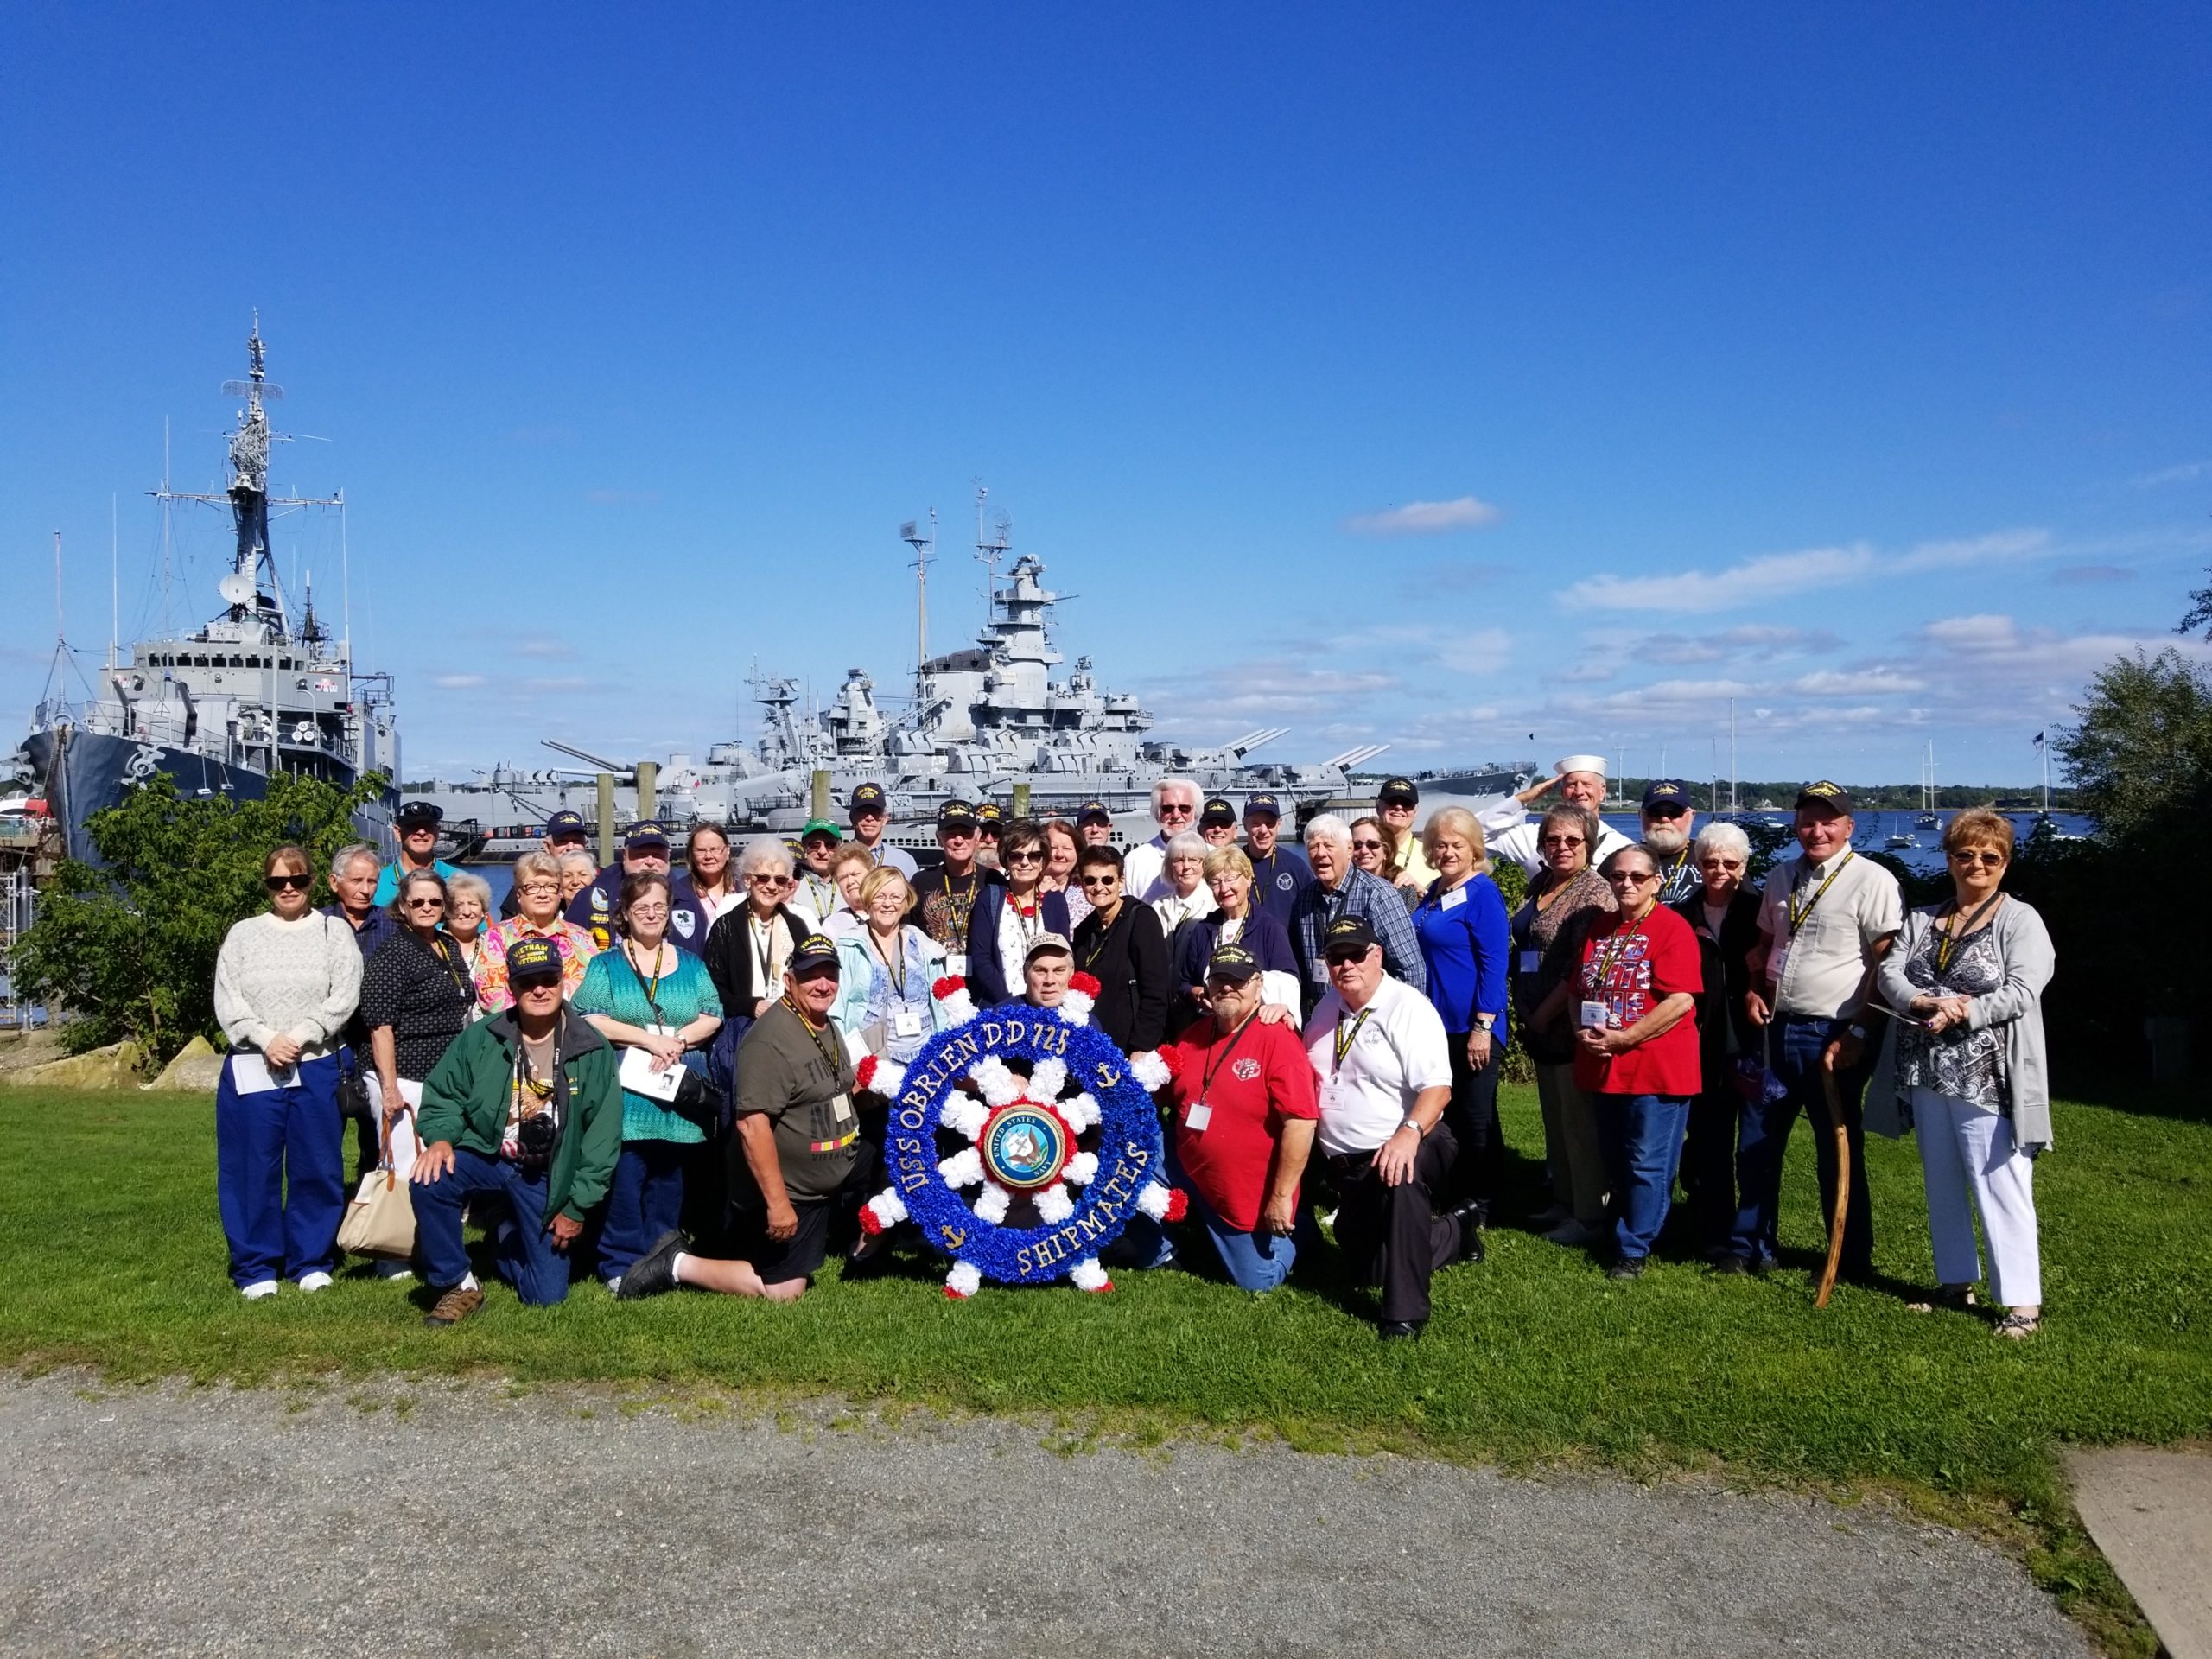 Group photo with the view of USS Massachusetts at the Battleship Cove in Fall River, MA.